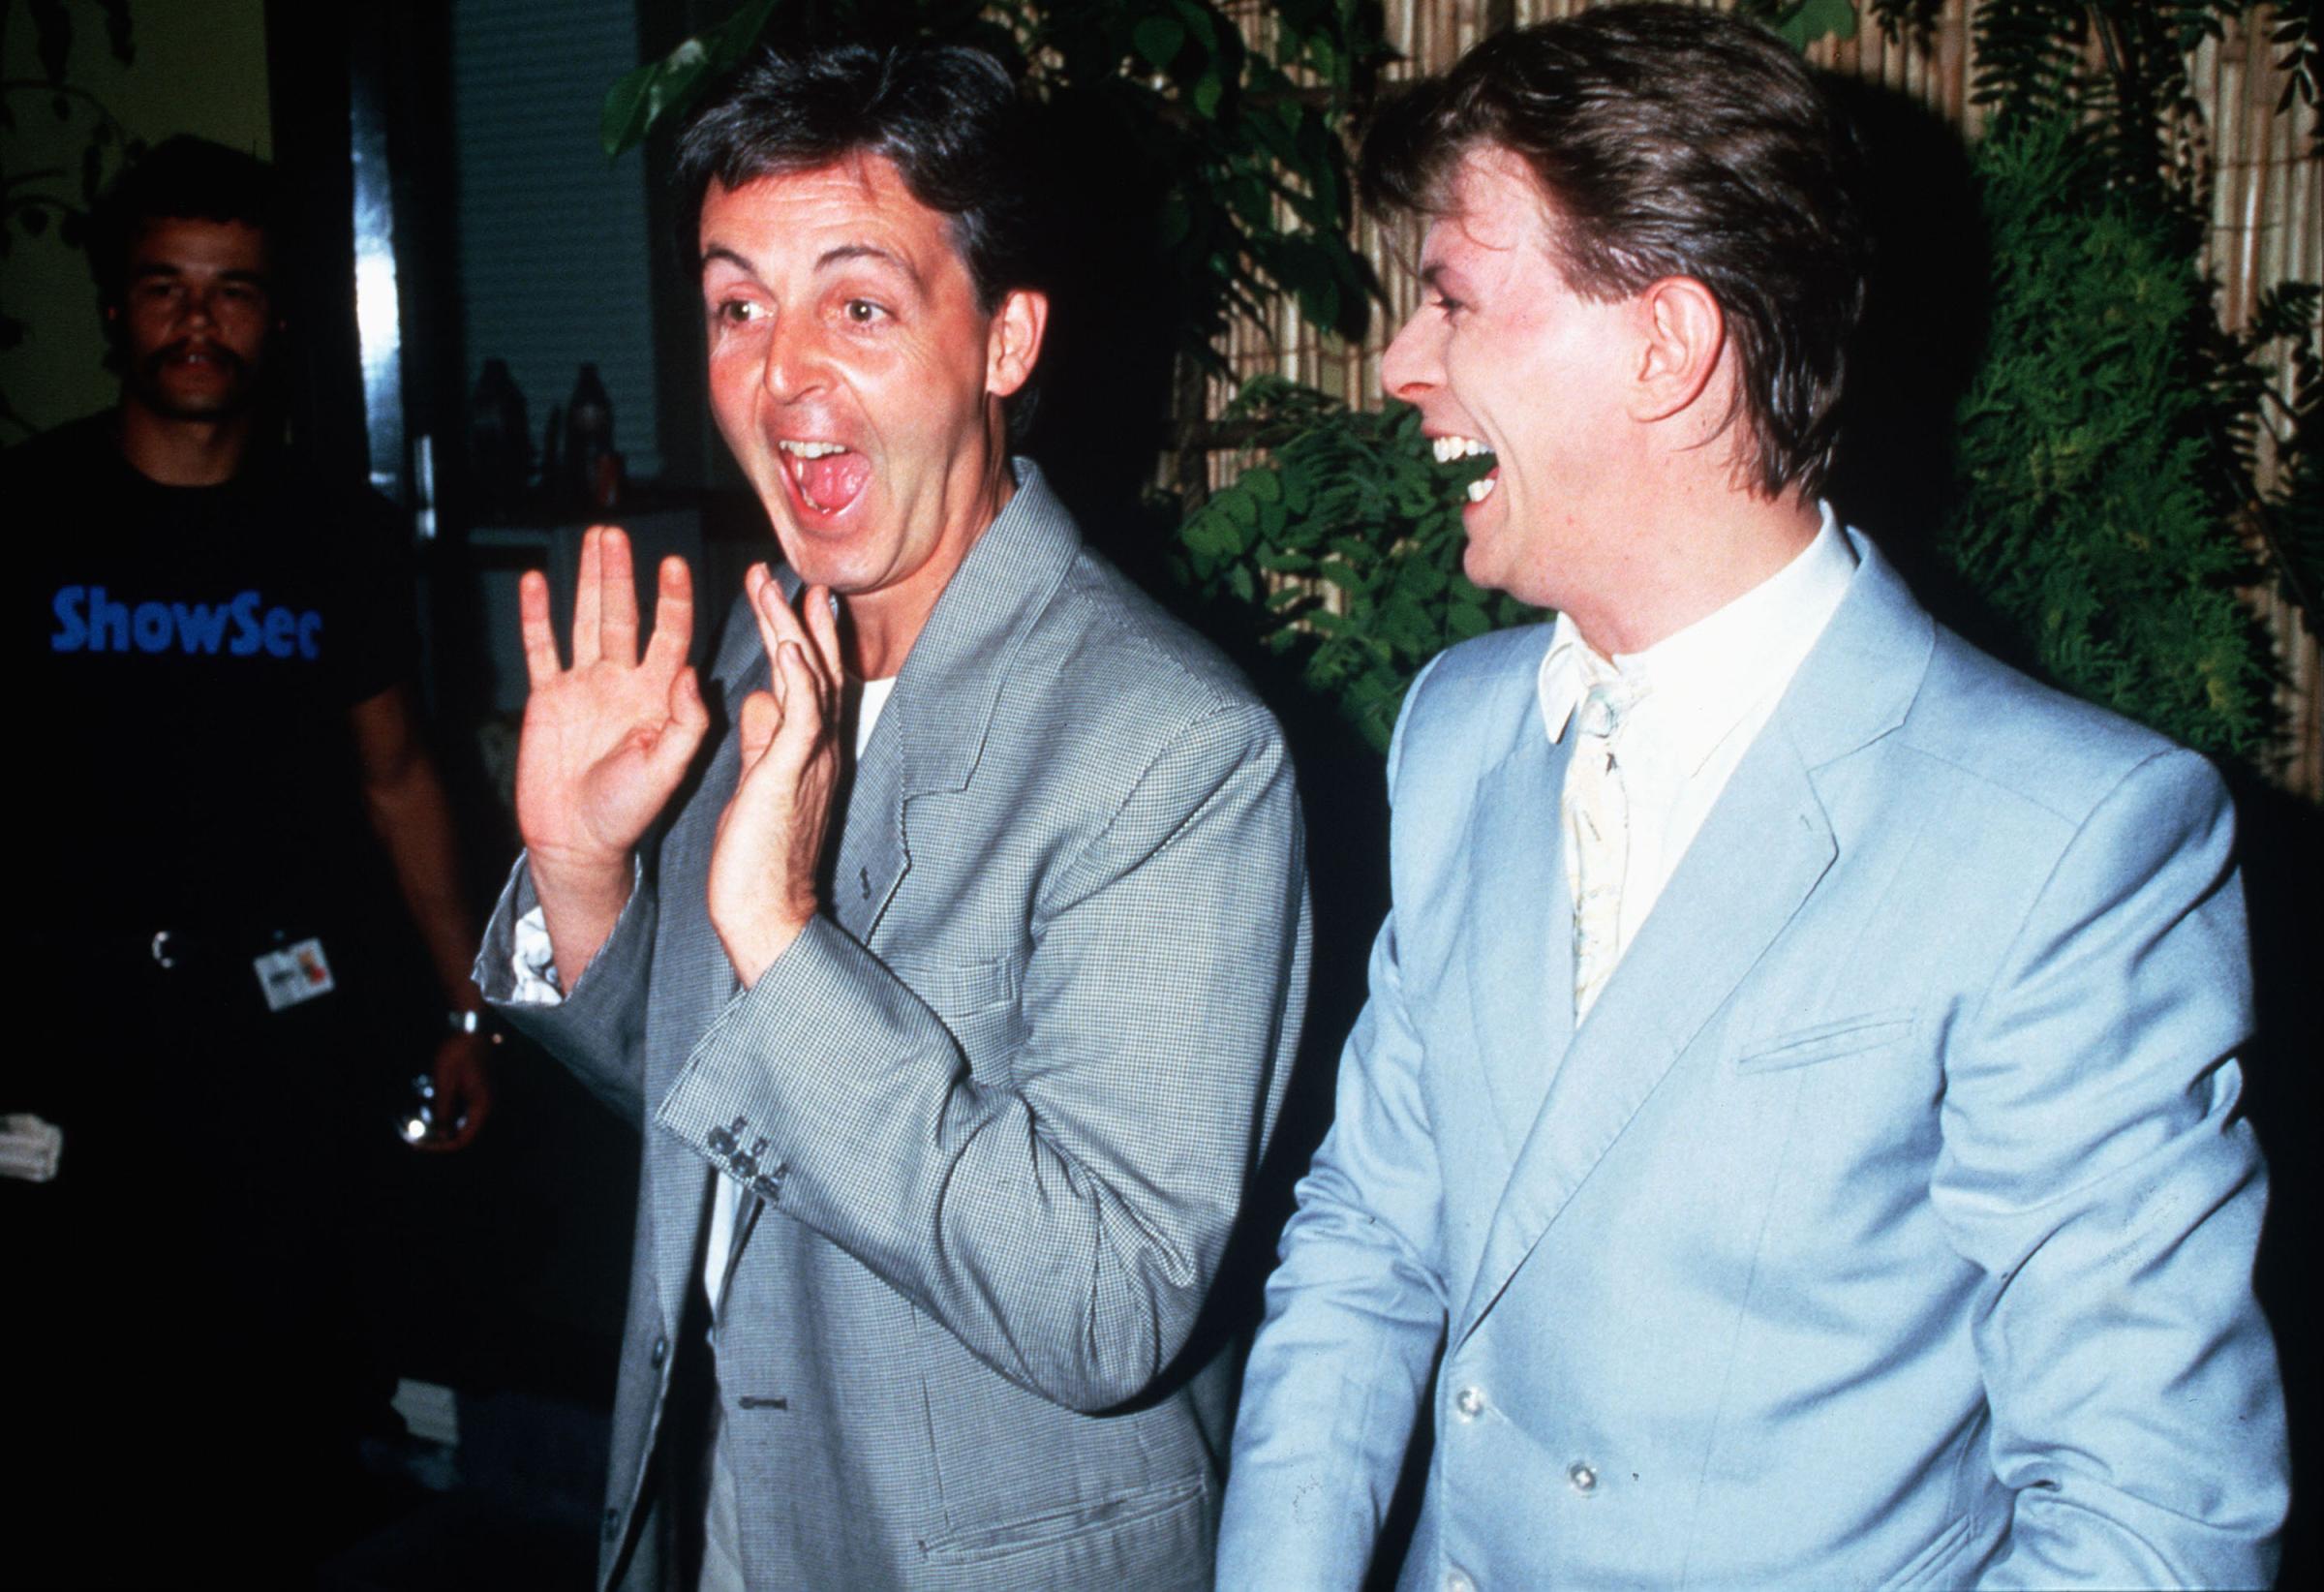 Paul McCartney and David Bowie backstage at Live Aid on July 13, 1985 in London.